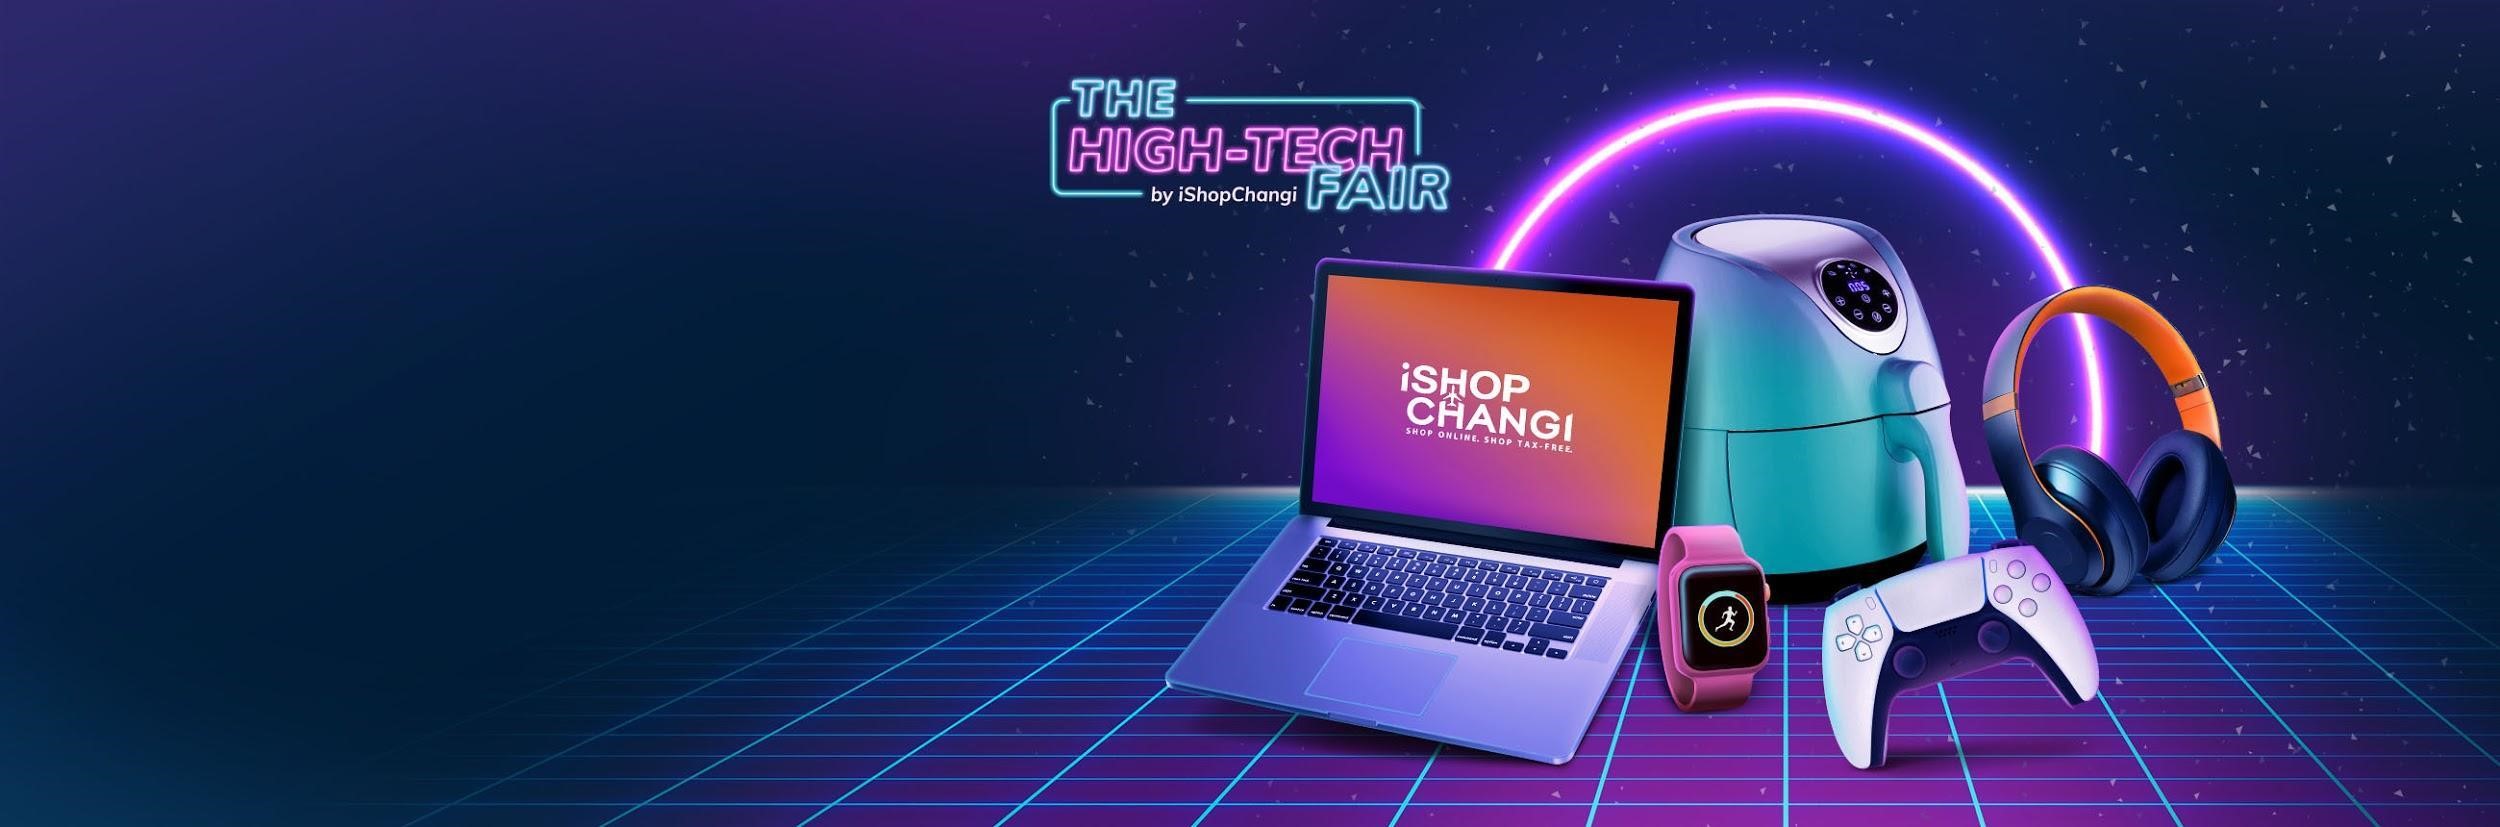 Upgrade Your Gadgets with iShopChangi’s High-Tech Fair